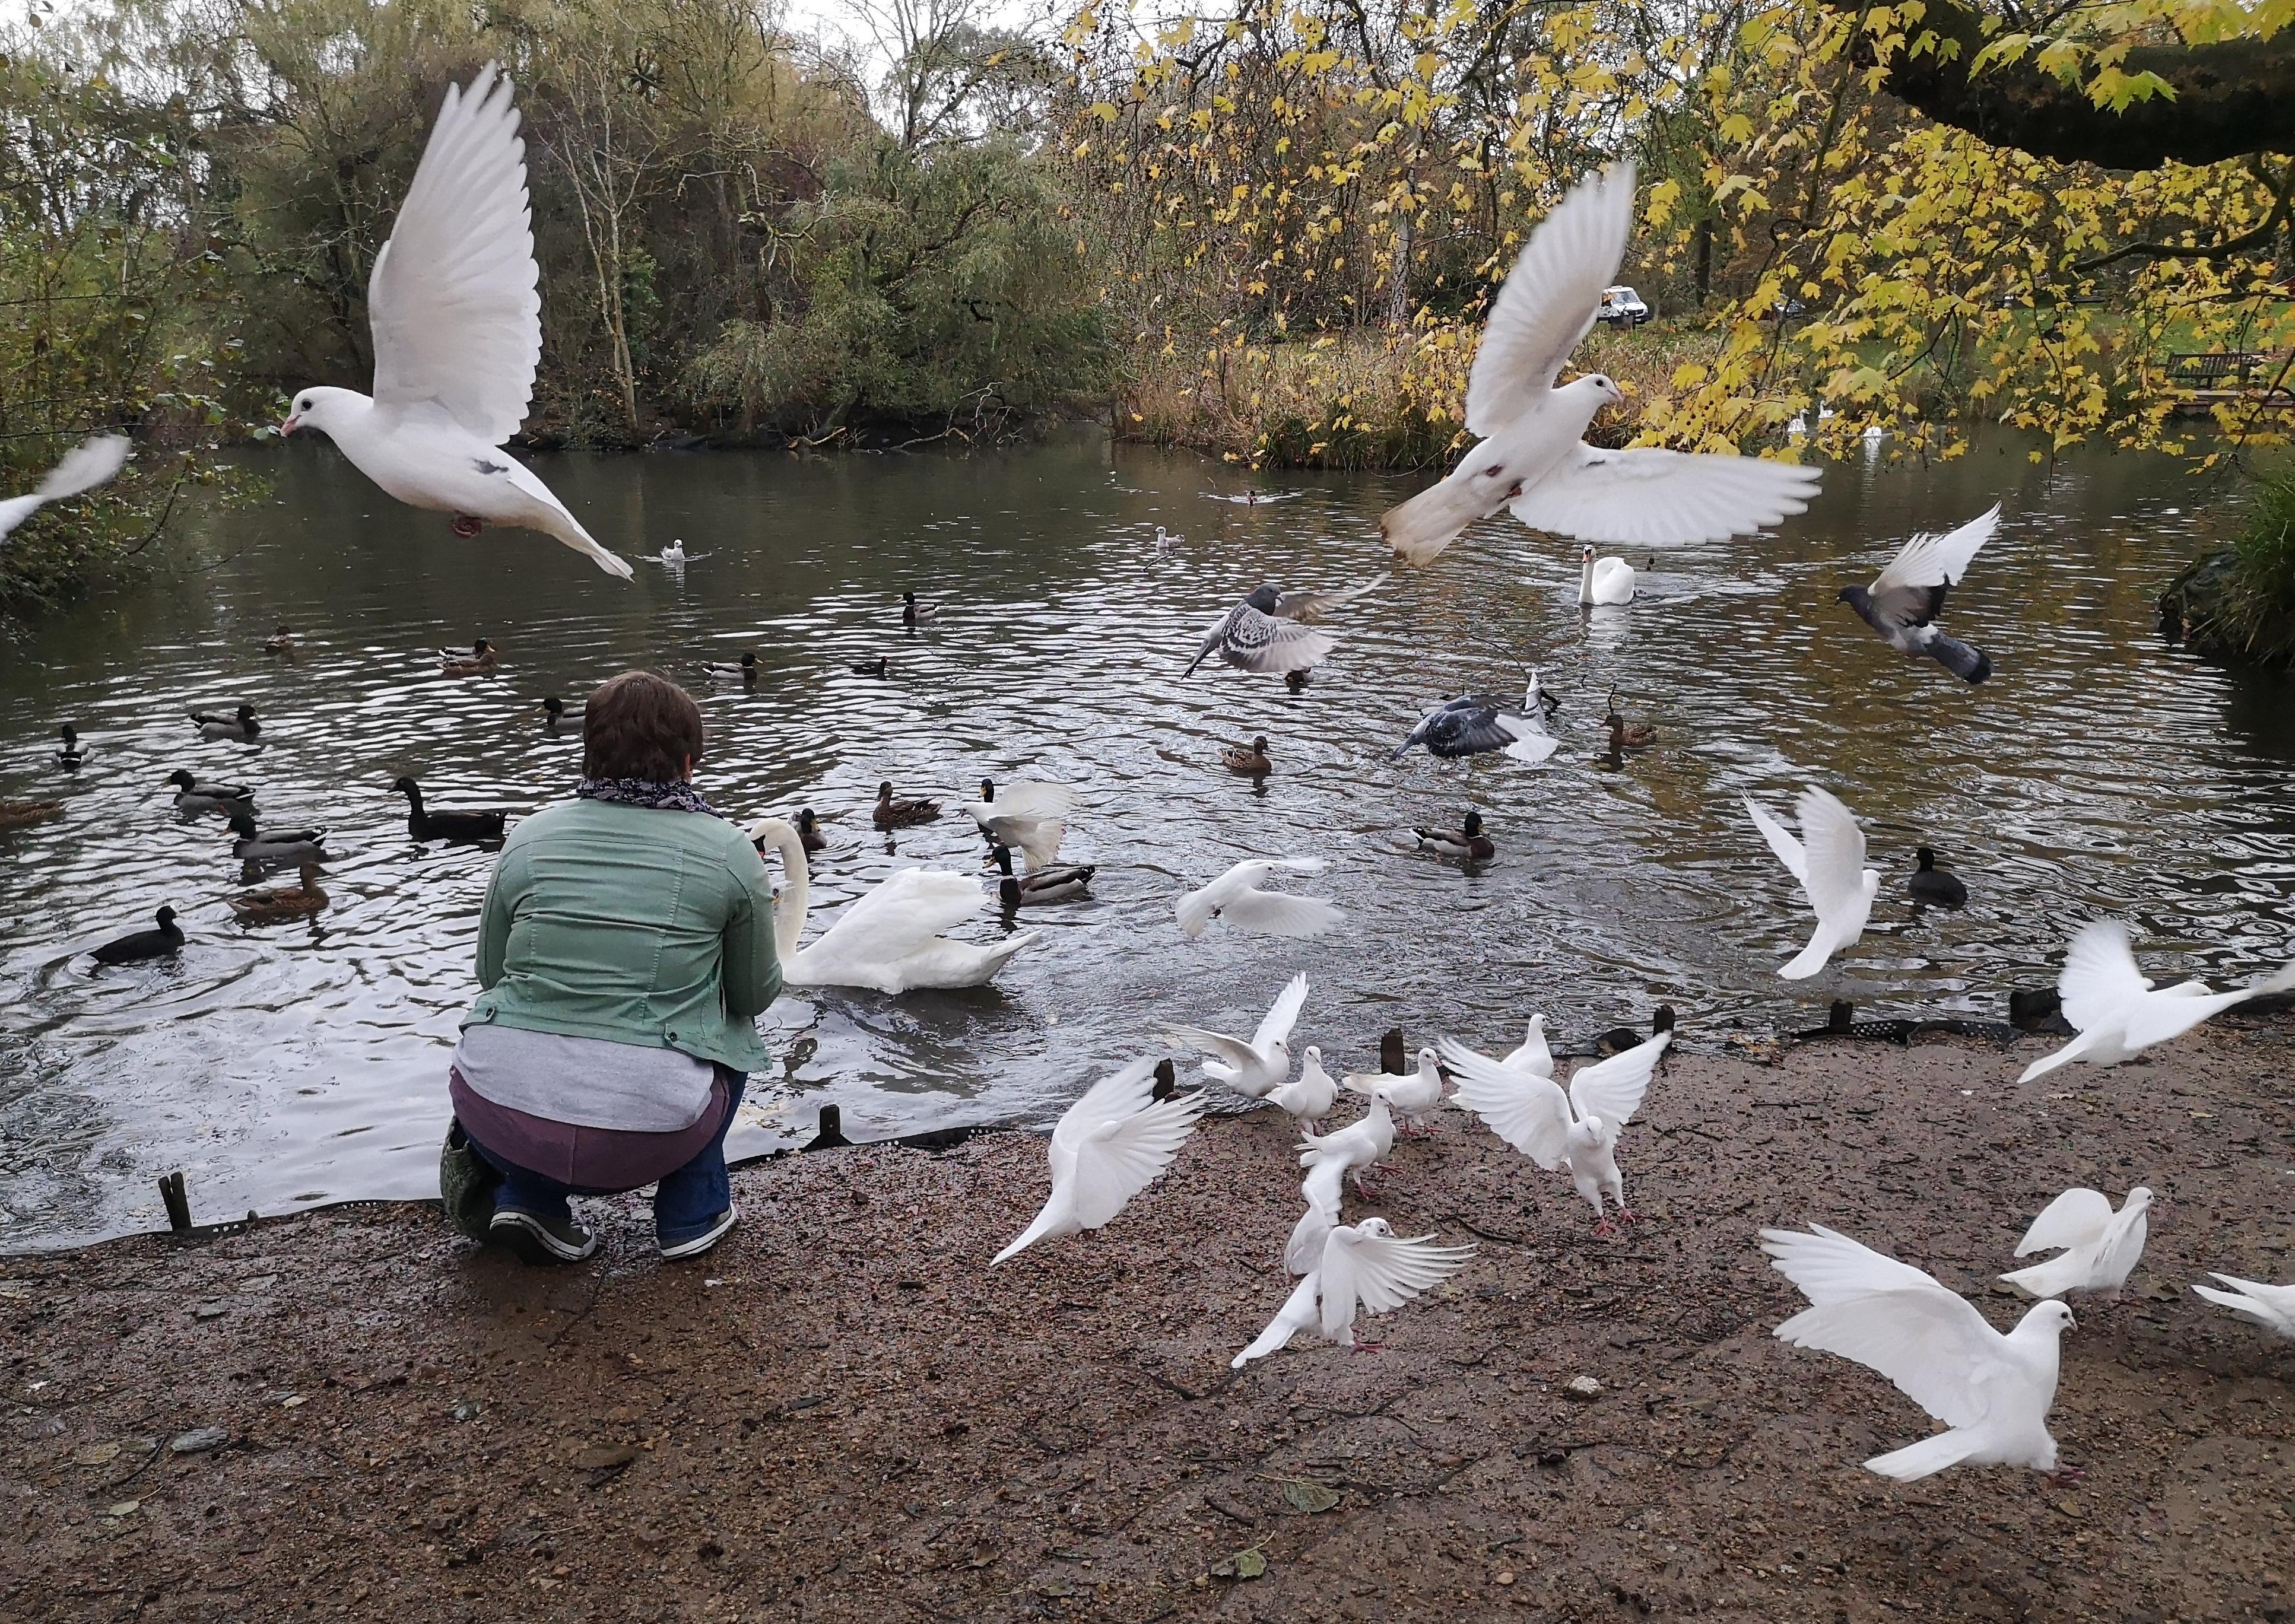 Feeding time at Decoy Pond, Hampden Park - taken by Jim Slater with a Huawei P20 SUS-200129-111451001